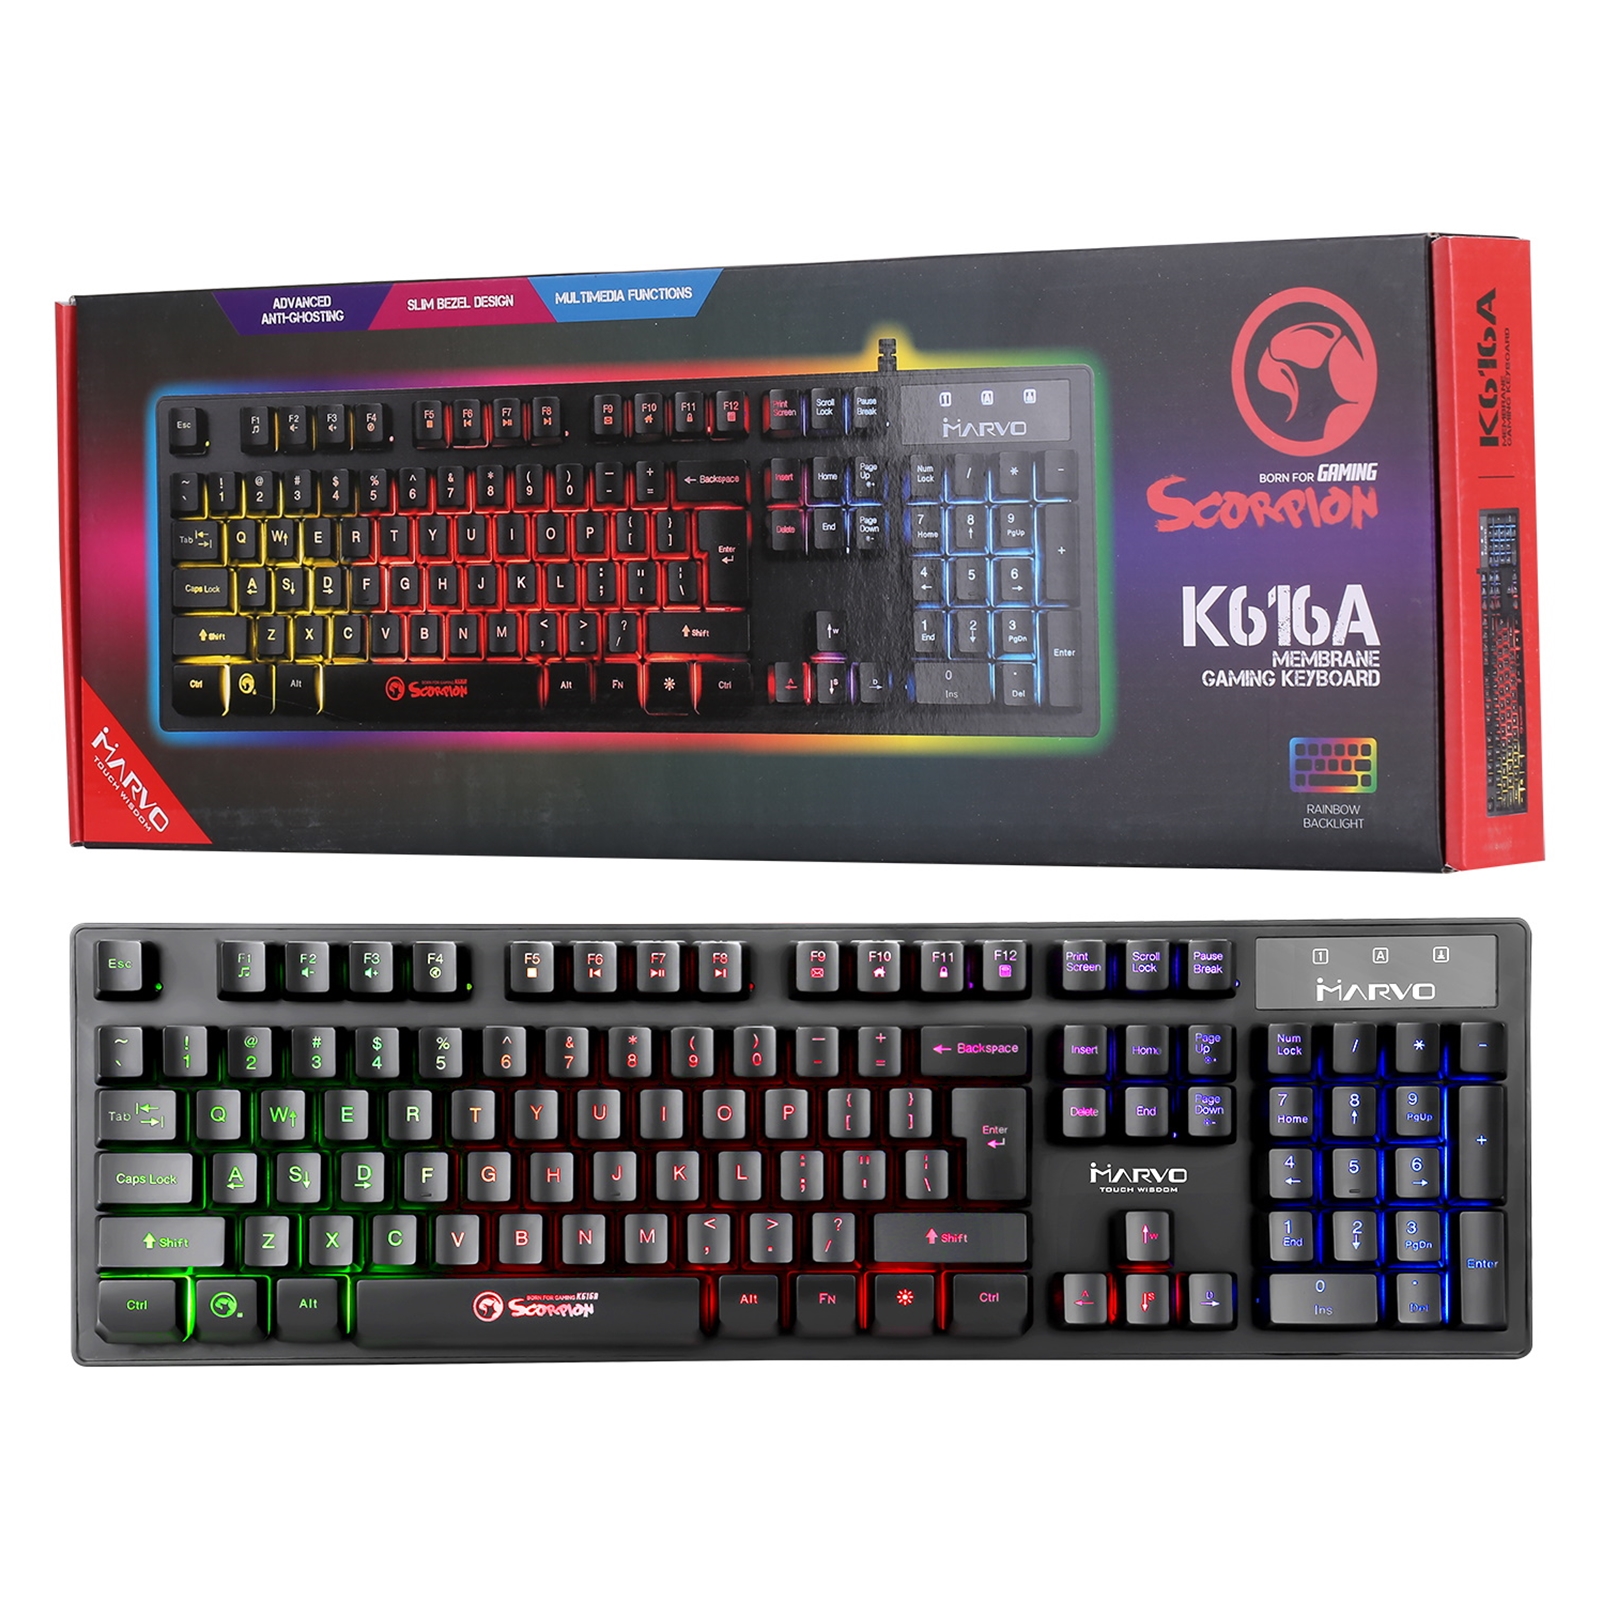 Marvo Scorpion K616A Gaming Keyboard, 3 Colour LED Backlit, USB 2.0, Frameless and Compact Design with Multi-Media and Anti-ghosting Keys, UK Layout, Membrane